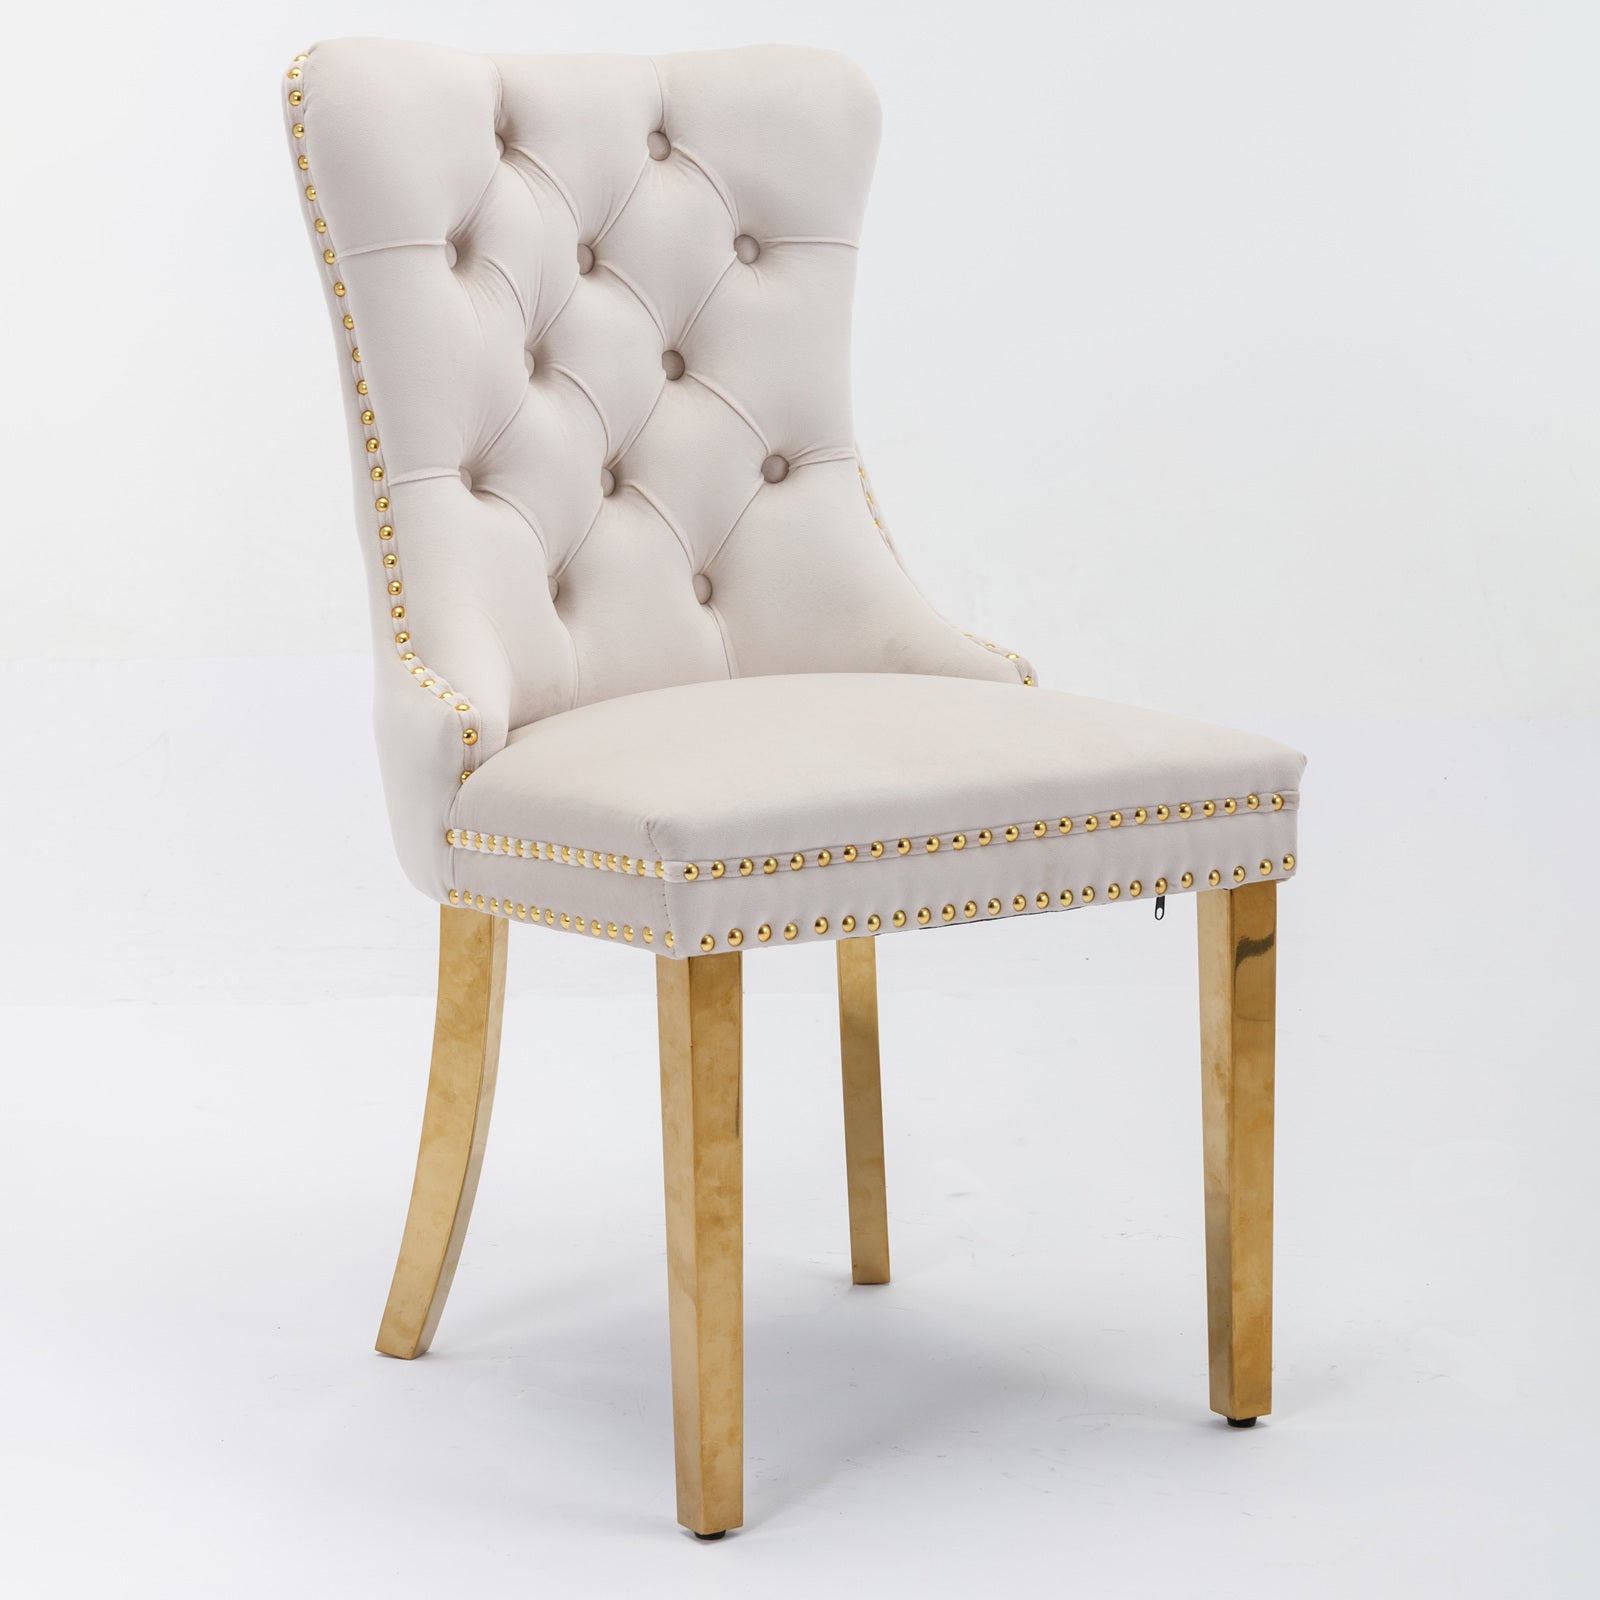 Set of 2 Paris Beige Velvet Tufted Dining Chair With Gold Naihead Trim and Metal Legs